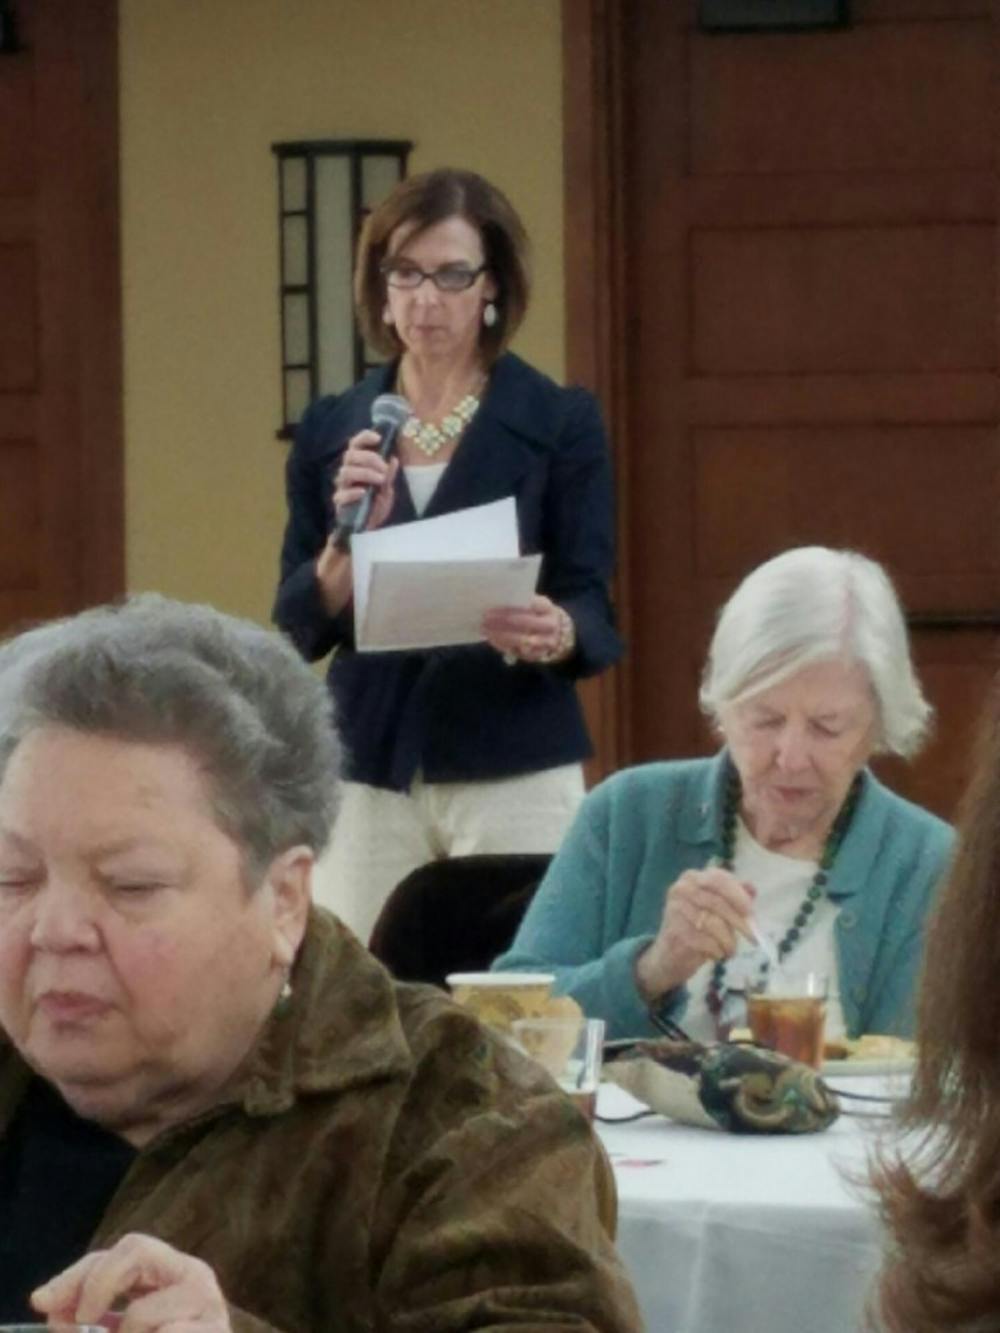 <p>Stacey Yusko, the executive director of the Chapel Hill-Carrboro Meals on Wheels, speaks at a celebration event.</p>